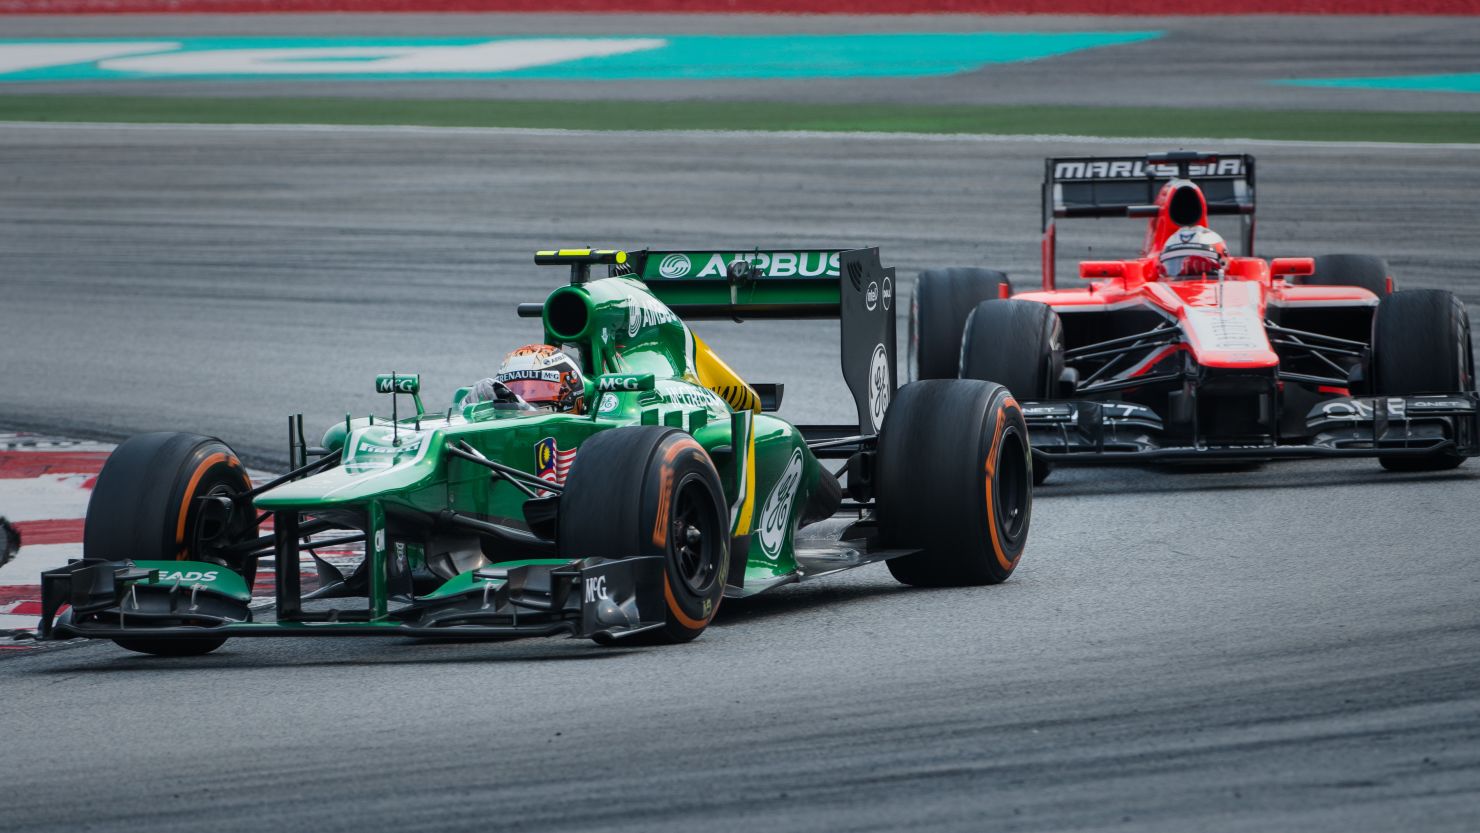 The Caterham and Marussia teams have had an intense rivalry since joining Formula One in 2010.